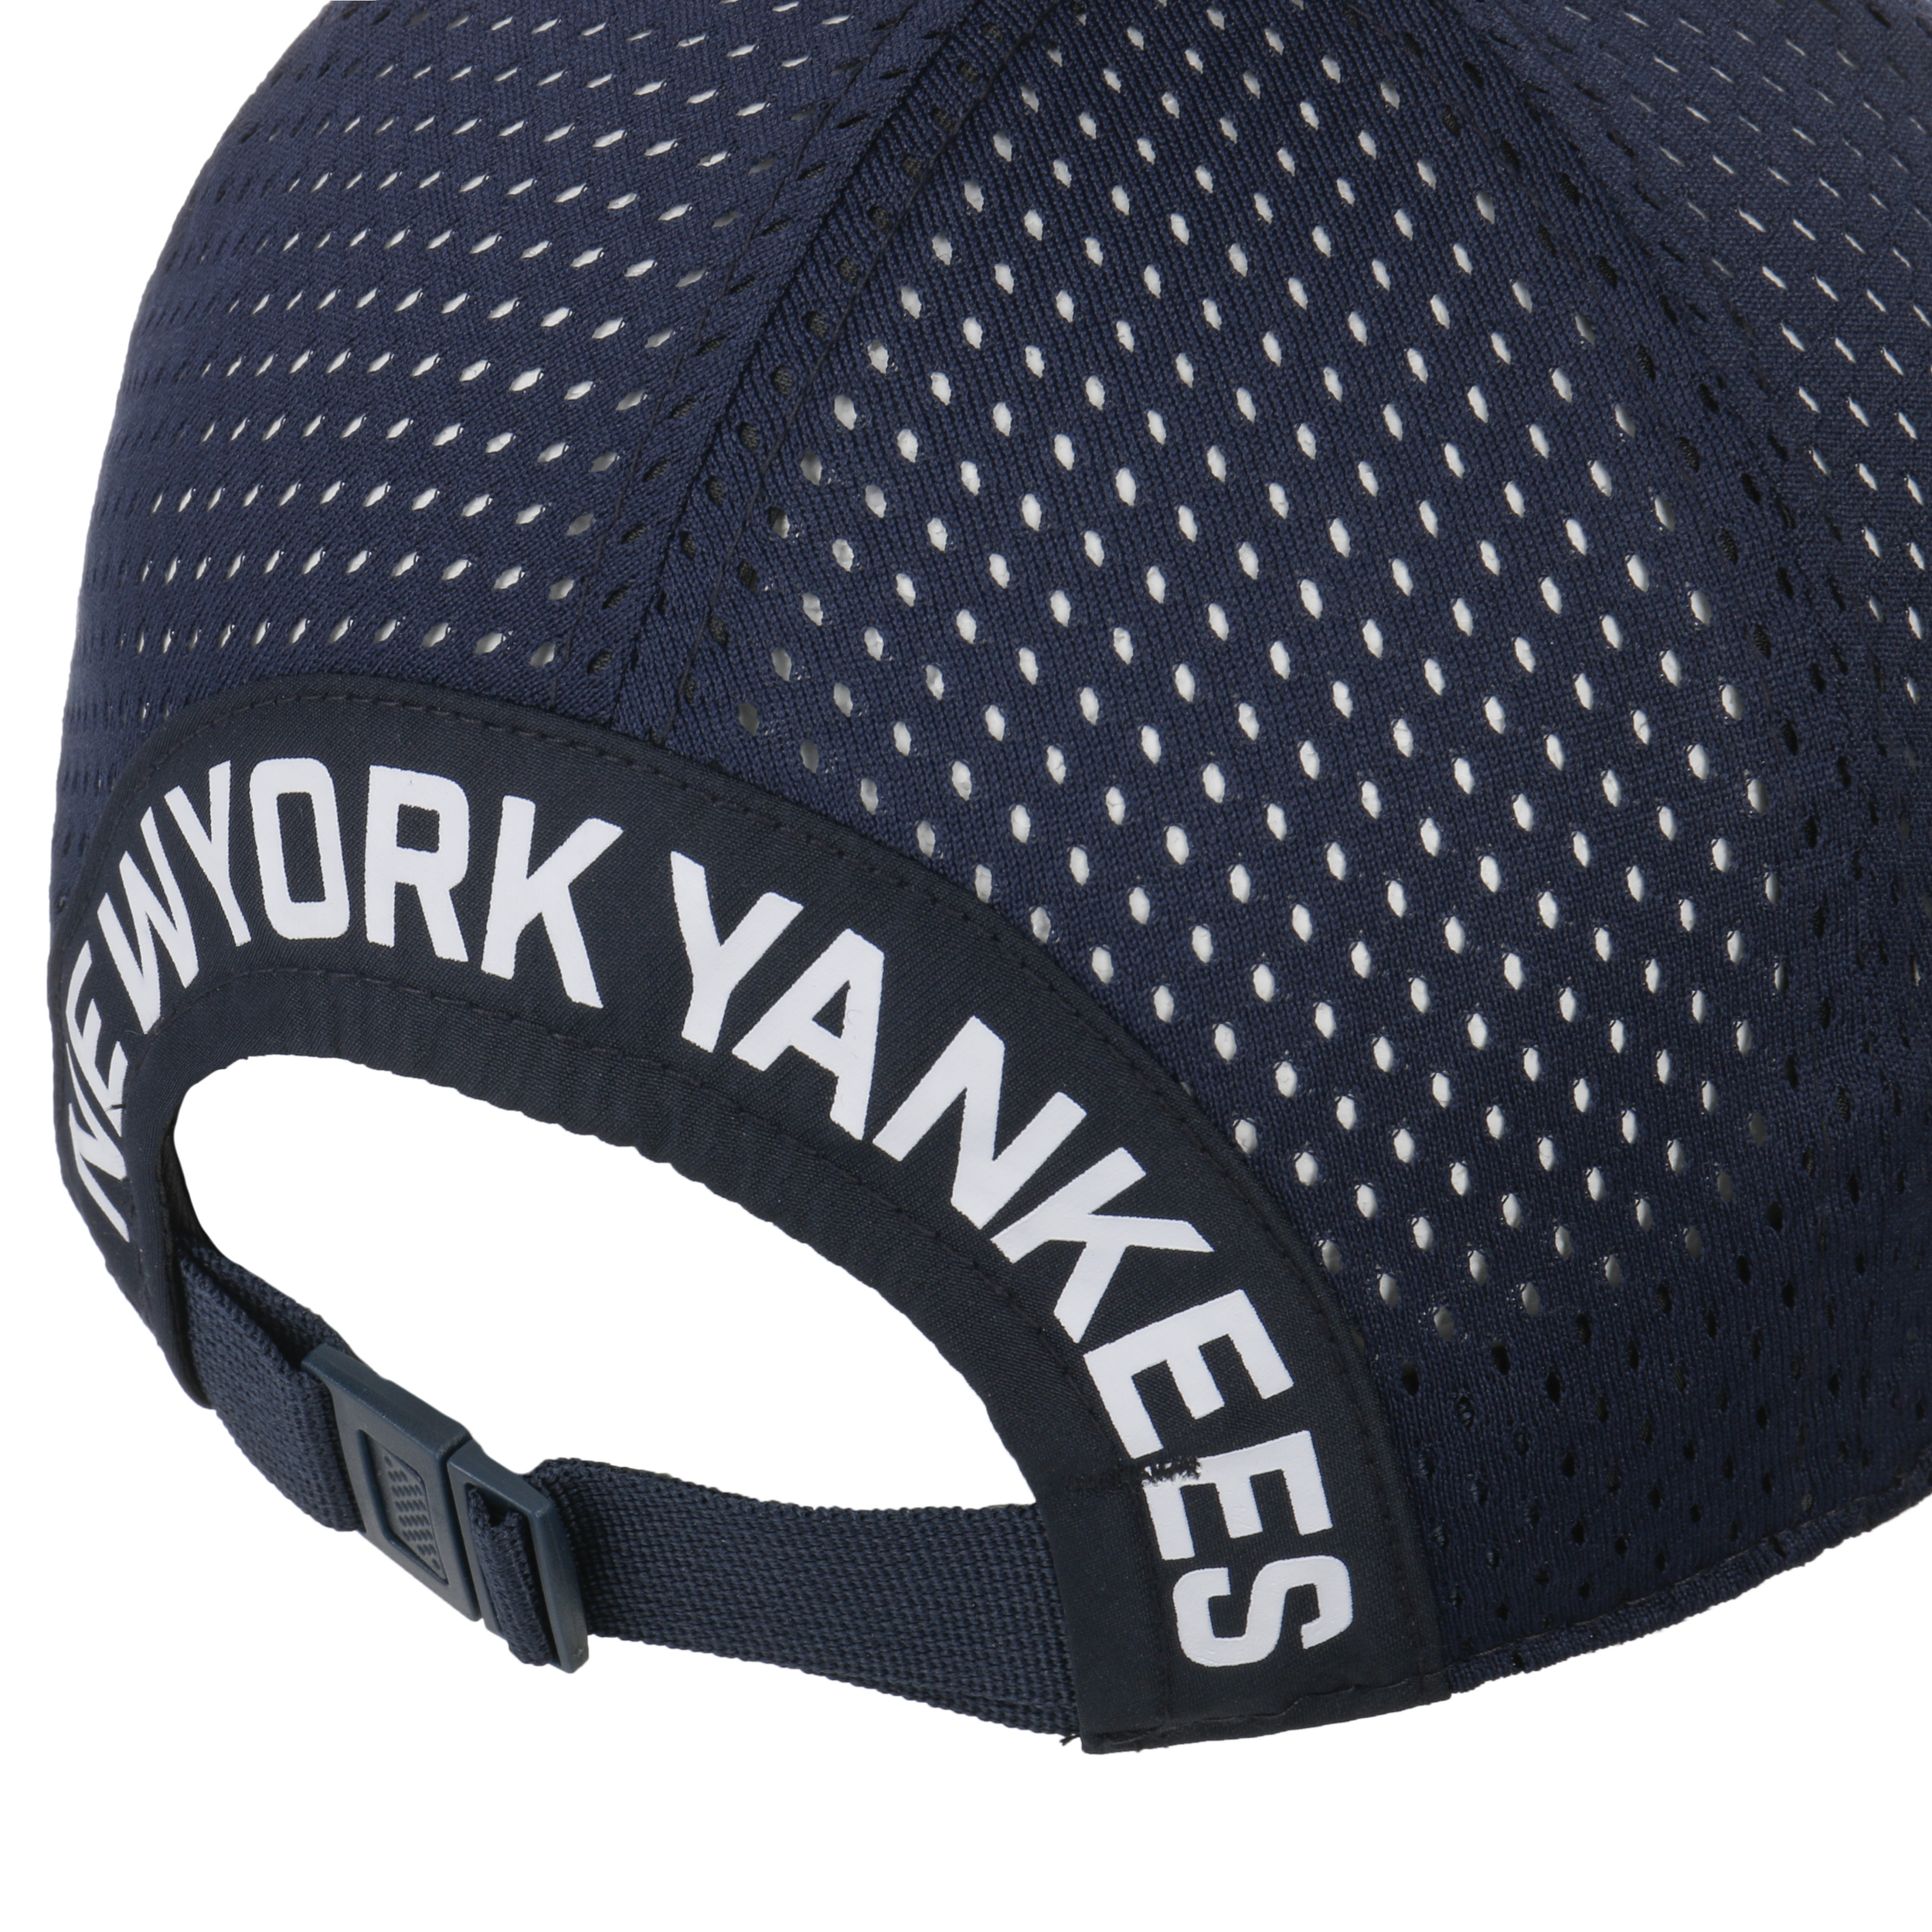 9Fifty MLB Team Arch Yankees Cap by New Era - 46,95 €